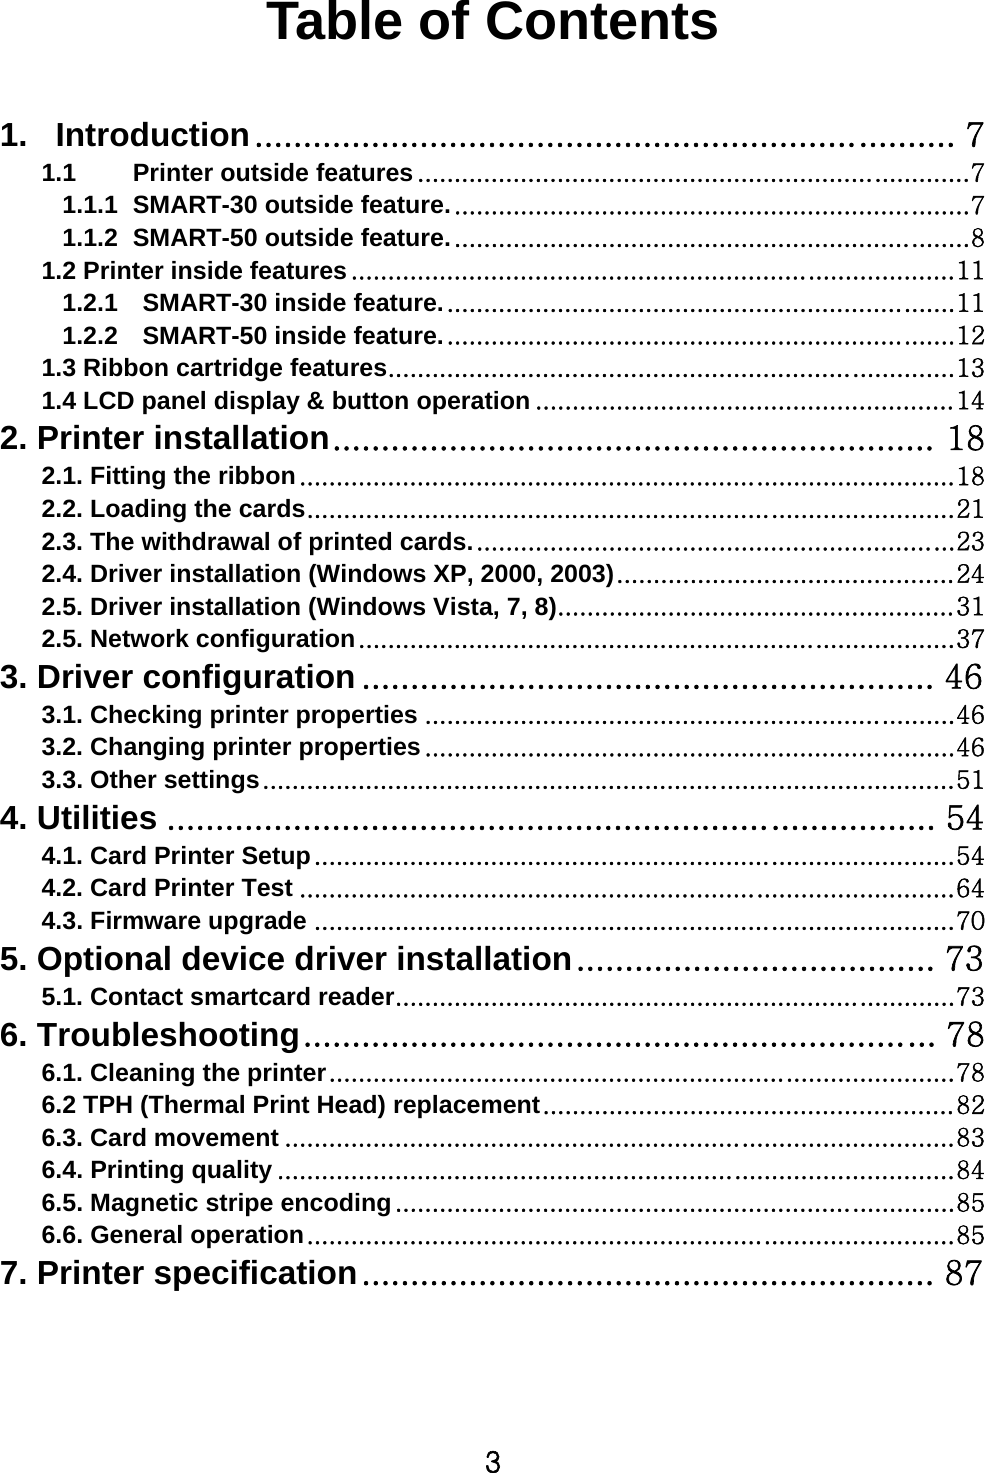 3  Table of Contents  1. Introduction ........................................................................ 7 1.1 Printer outside features ........................................................................... 7 1.1.1 SMART-30 outside feature. ...................................................................... 7 1.1.2 SMART-50 outside feature. ...................................................................... 8 1.2 Printer inside features .................................................................................. 11 1.2.1    SMART-30 inside feature. ..................................................................... 11 1.2.2    SMART-50 inside feature. ..................................................................... 12 1.3 Ribbon cartridge features ............................................................................. 13 1.4 LCD panel display &amp; button operation ......................................................... 14 2. Printer installation .............................................................. 18 2.1. Fitting the ribbon ......................................................................................... 18 2.2. Loading the cards ........................................................................................ 21 2.3. The withdrawal of printed cards. ................................................................. 23 2.4. Driver installation (Windows XP, 2000, 2003) .............................................. 24 2.5. Driver installation (Windows Vista, 7, 8) ...................................................... 31 2.5. Network configuration ................................................................................. 37 3. Driver configuration ........................................................... 46 3.1. Checking printer properties ........................................................................ 46 3.2. Changing printer properties ........................................................................ 46 3.3. Other settings .............................................................................................. 51 4. Utilities ............................................................................... 54 4.1. Card Printer Setup ....................................................................................... 54 4.2. Card Printer Test ......................................................................................... 64 4.3. Firmware upgrade ....................................................................................... 70 5. Optional device driver installation ..................................... 73 5.1. Contact smartcard reader ............................................................................ 73 6. Troubleshooting ................................................................. 78 6.1. Cleaning the printer ..................................................................................... 78 6.2 TPH (Thermal Print Head) replacement ........................................................ 82 6.3. Card movement ........................................................................................... 83 6.4. Printing quality ............................................................................................ 84 6.5. Magnetic stripe encoding ............................................................................ 85 6.6. General operation ........................................................................................ 85 7. Printer specification ........................................................... 87  